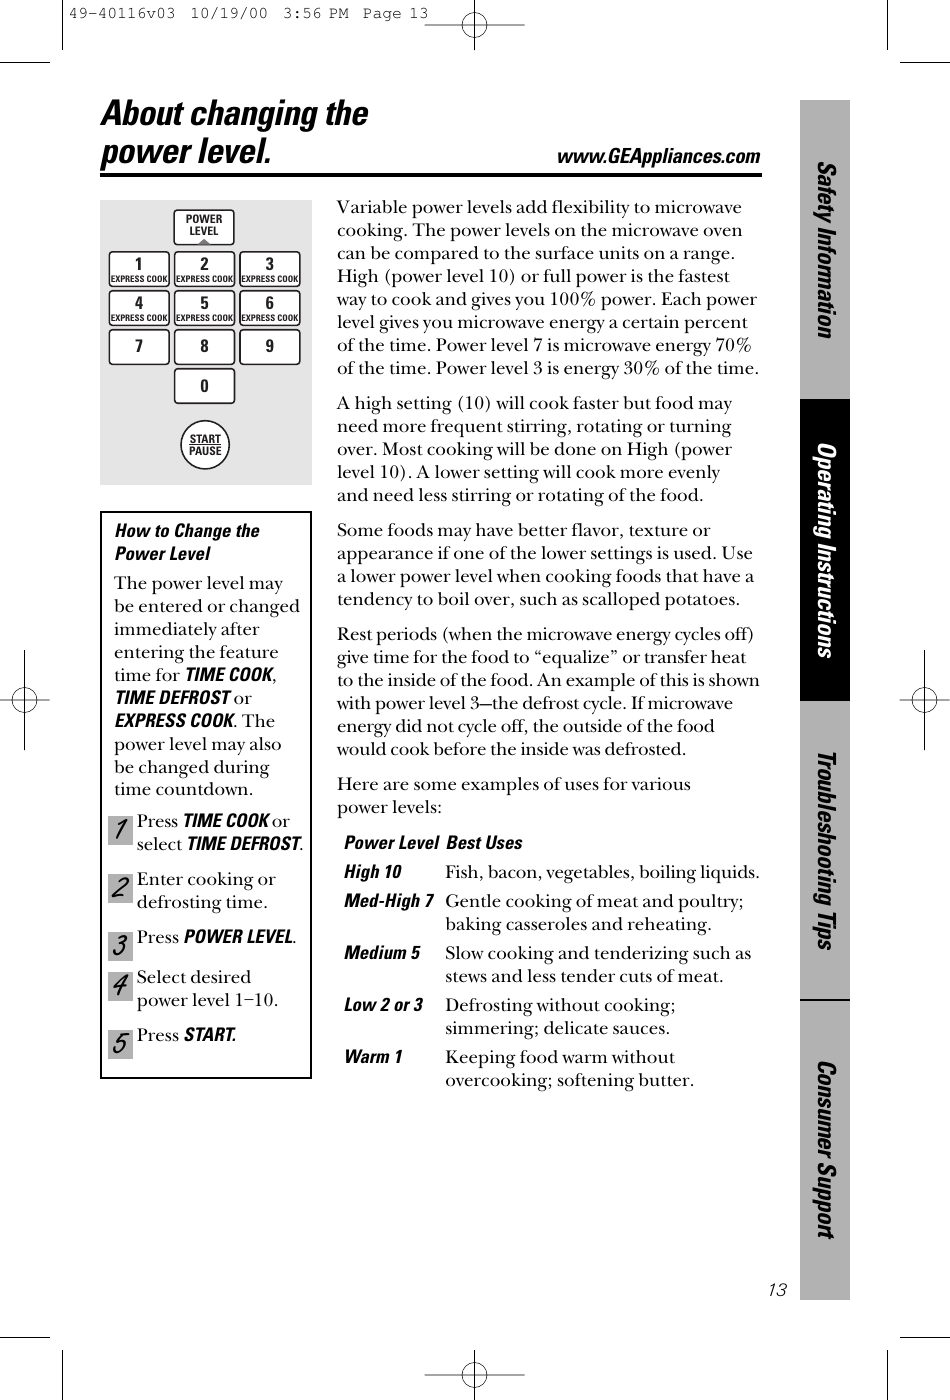 Consumer SupportTroubleshooting TipsOperating InstructionsSafety Information13About changing the power level.www.GEAppliances.comVariable power levels add flexibility to microwavecooking. The power levels on the microwave ovencan be compared to the surface units on a range.High (power level 10) or full power is the fastestway to cook and gives you 100% power. Each powerlevel gives you microwave energy a certain percentof the time. Power level 7 is microwave energy 70%of the time. Power level 3 is energy 30% of the time.A high setting (10) will cook faster but food mayneed more frequent stirring, rotating or turningover. Most cooking will be done on High (powerlevel 10). A lower setting will cook more evenly and need less stirring or rotating of the food. Some foods may have better flavor, texture orappearance if one of the lower settings is used. Use a lower power level when cooking foods that have atendency to boil over, such as scalloped potatoes.Rest periods (when the microwave energy cycles off)give time for the food to “equalize” or transfer heatto the inside of the food. An example of this is shownwith power level 3—the defrost cycle. If microwaveenergy did not cycle off, the outside of the foodwould cook before the inside was defrosted.Here are some examples of uses for various power levels:Power Level Best UsesHigh 10Fish, bacon, vegetables, boiling liquids.Med-High 7Gentle cooking of meat and poultry;baking casseroles and reheating.Medium 5Slow cooking and tenderizing such asstews and less tender cuts of meat.Low 2 or 3 Defrosting without cooking;simmering; delicate sauces.Warm 1Keeping food warm withoutovercooking; softening butter.POWERLEVEL1EXPRESS COOK3EXPRESS COOK4EXPRESS COOK6EXPRESS COOK2EXPRESS COOK5EXPRESS COOK7890STARTPAUSEHow to Change the Power Level The power level may be entered or changedimmediately afterentering the featuretime for TIME COOK,TIME DEFROST orEXPRESS COOK. Thepower level may alsobe changed duringtime countdown.Press TIME COOKorselect TIME DEFROST.Enter cooking ordefrosting time.Press POWER LEVEL.Select desiredpower level 1–10.Press START.5432149-40116v03  10/19/00  3:56 PM  Page 13